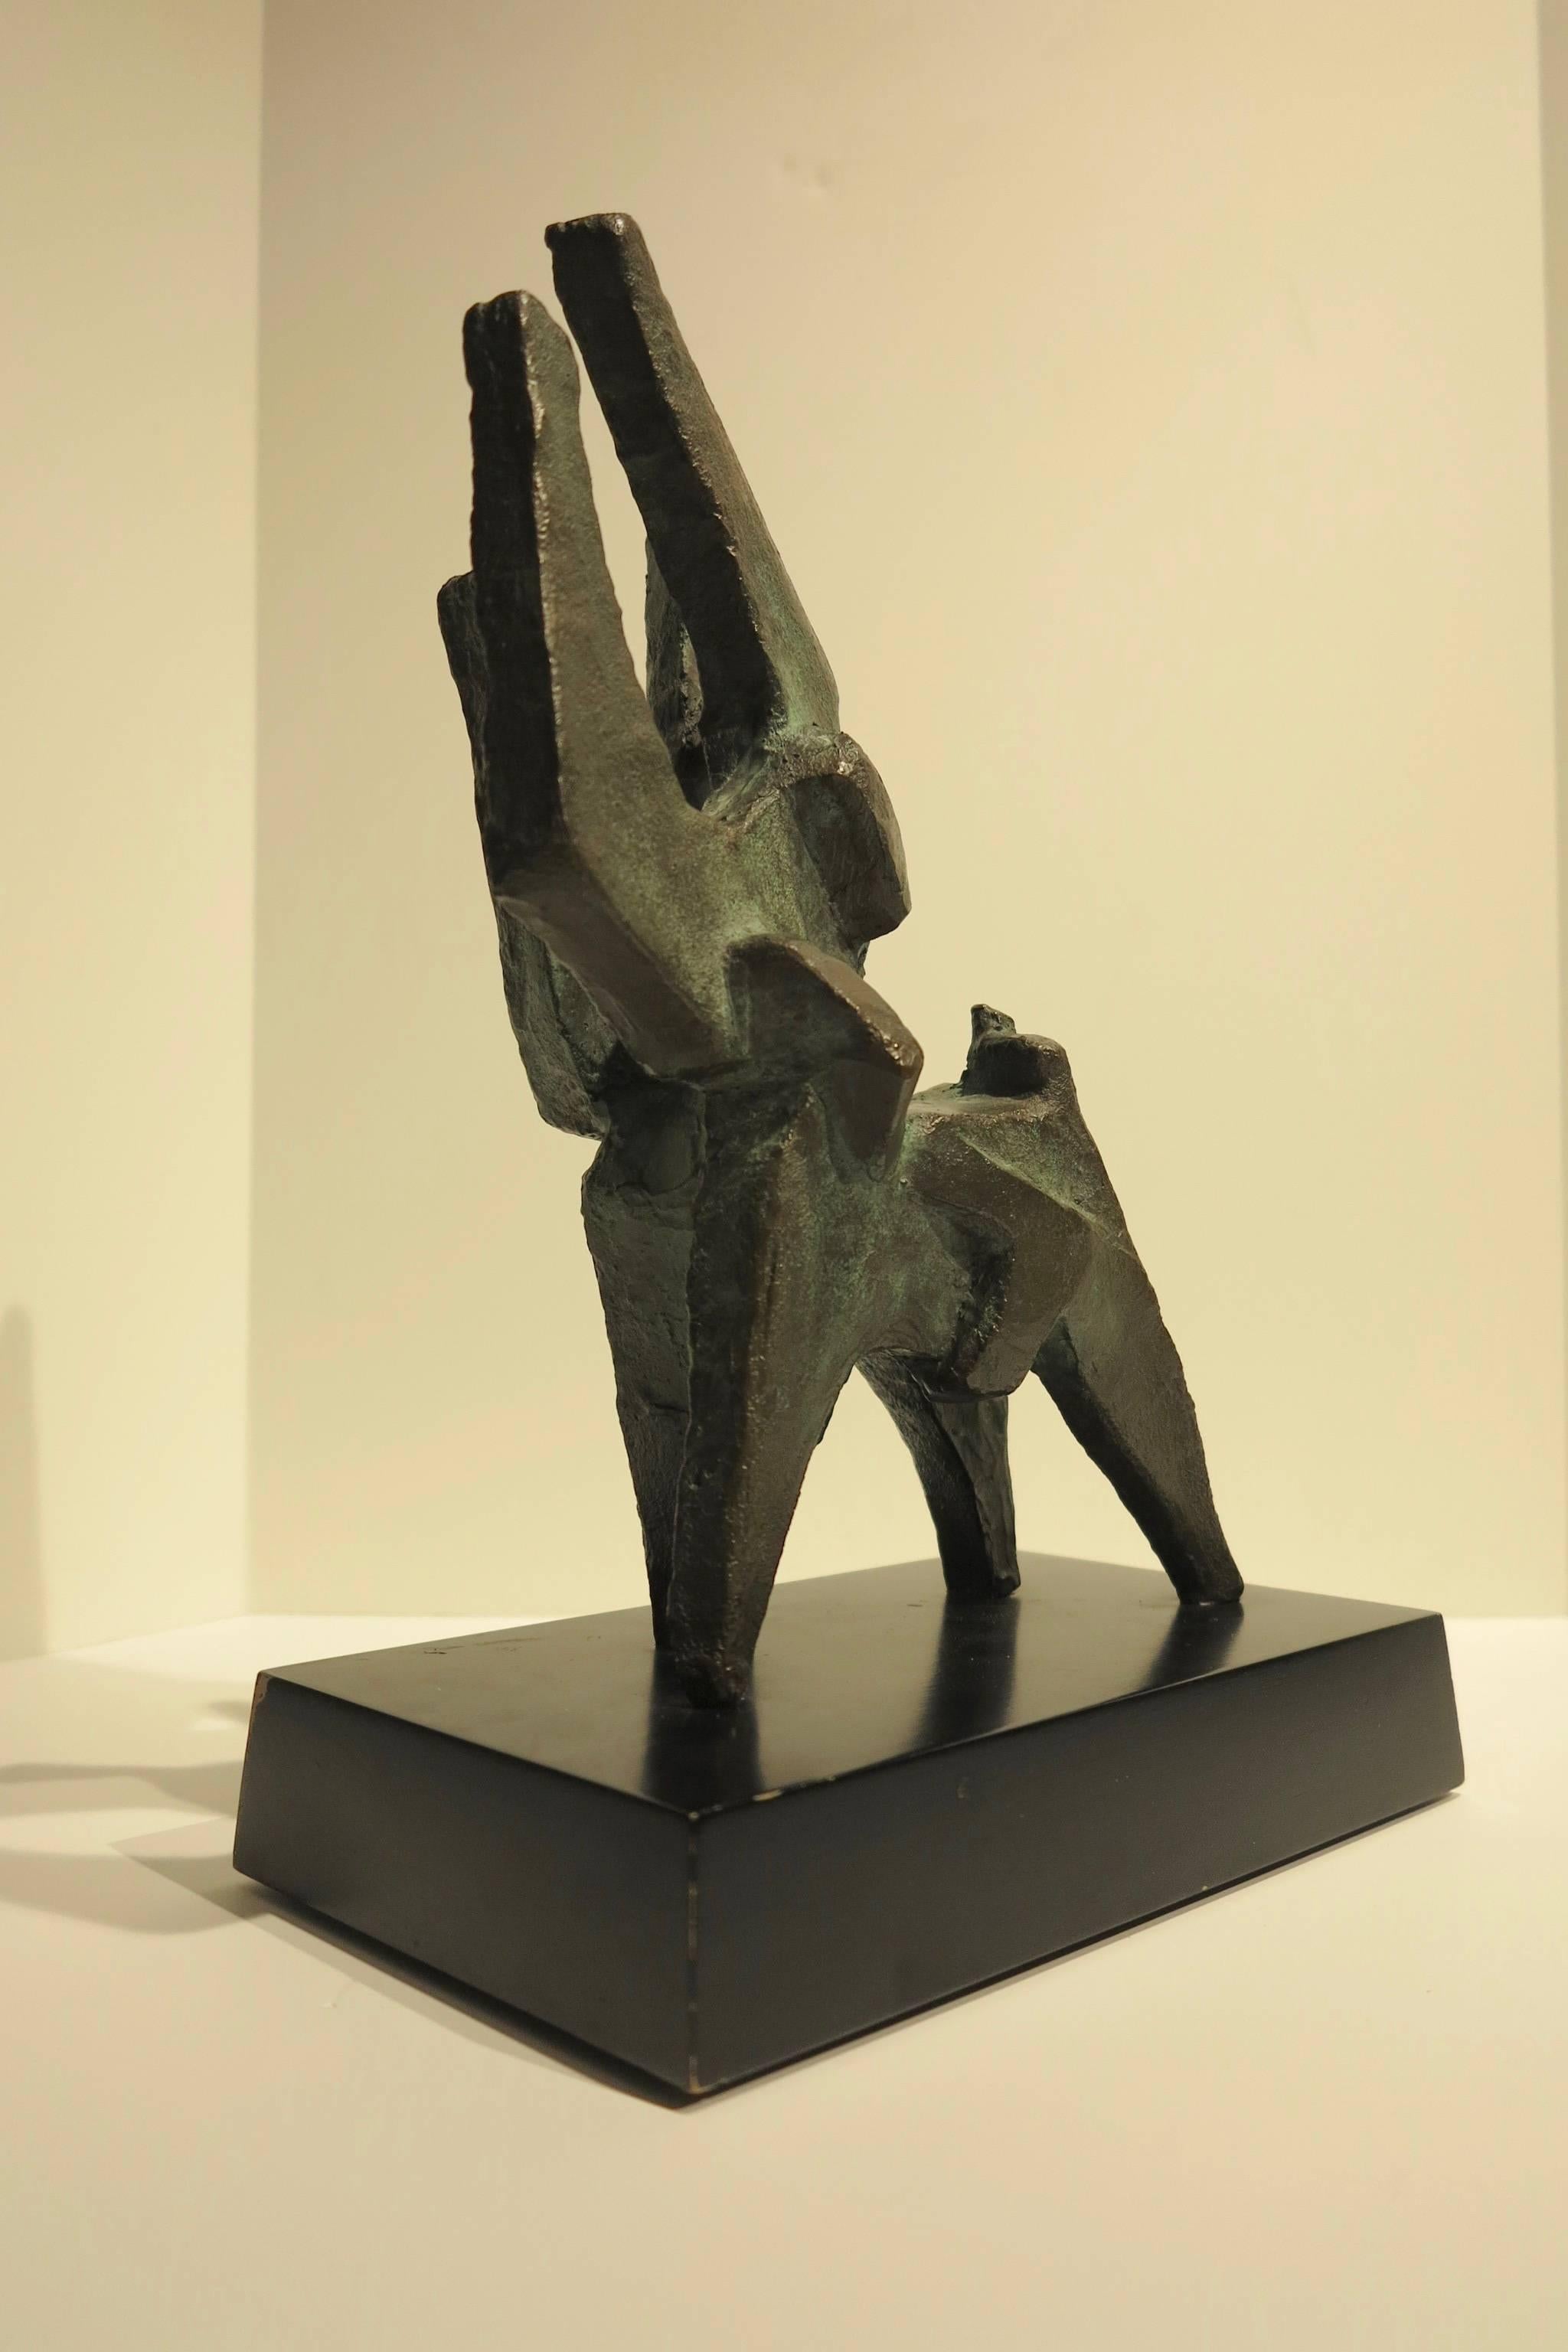 Stunning c. 1960 abstract expressionist sculpture by American artist, Vincent Cavallaro (1912-1985). Cast bronze on rotating beveled wood base.  Base measures 6 x 10.25 inches. Bronze measures 12.5 inches tall, 14.5 inches including base. Excellent